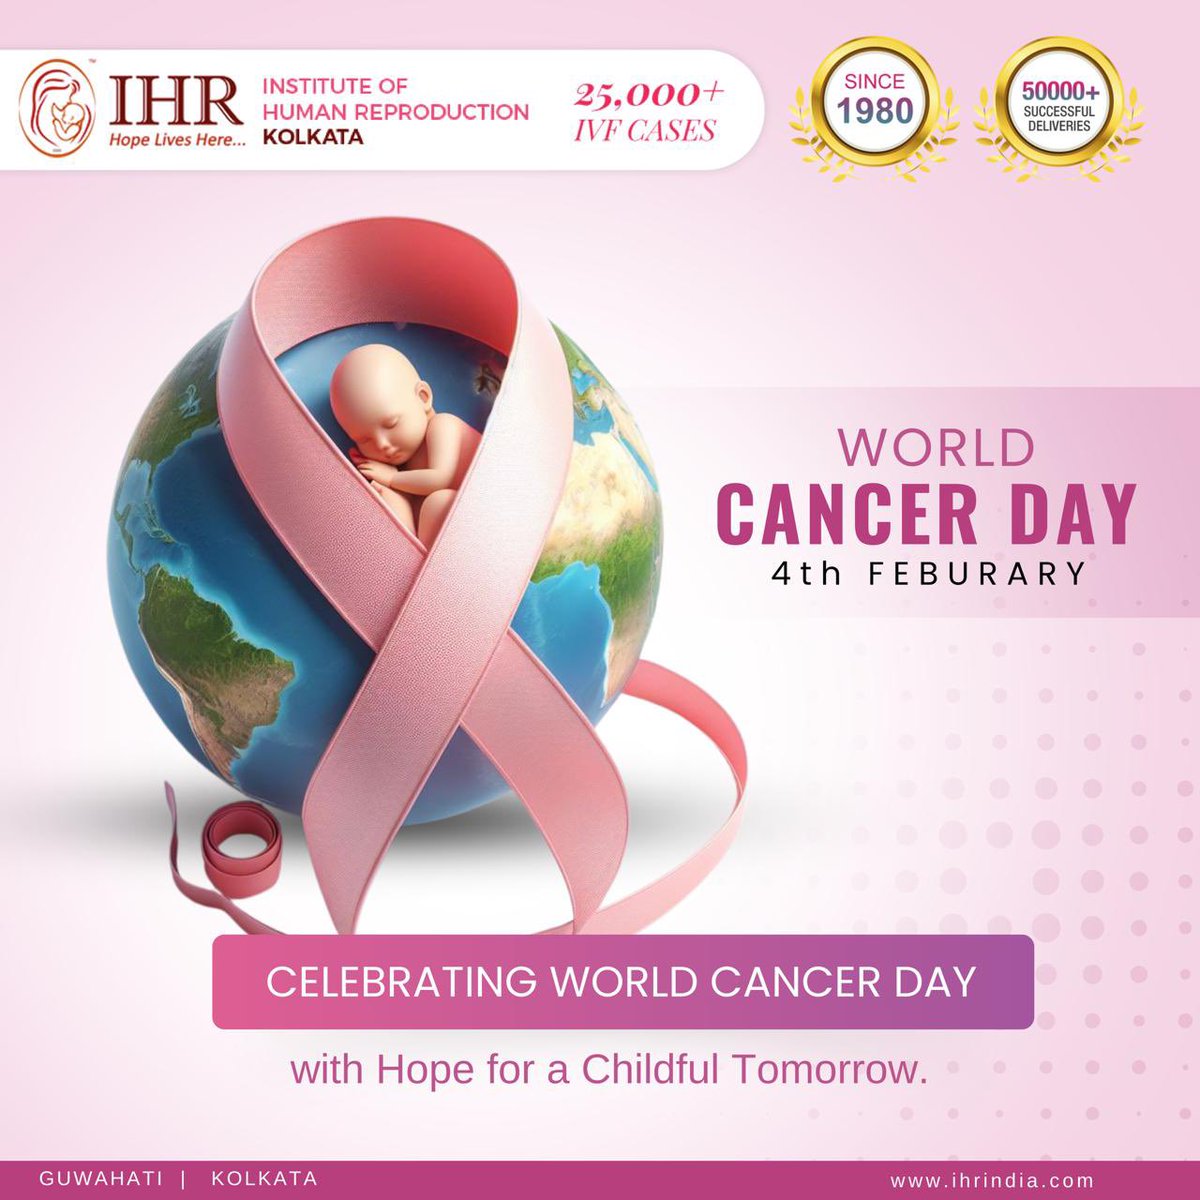 With every heartbeat, we reaffirm our commitment to fight, to hope, and to heal. 

#IHR #Ivf #worldcancerday #cancerday #cancer #ivfcentre  #fertility #ivfhospital #family #ivfsuccess #ihrkolkata #ivfkolkata #parents #parenthood #fertilityspecialist #ivfbabies #babies